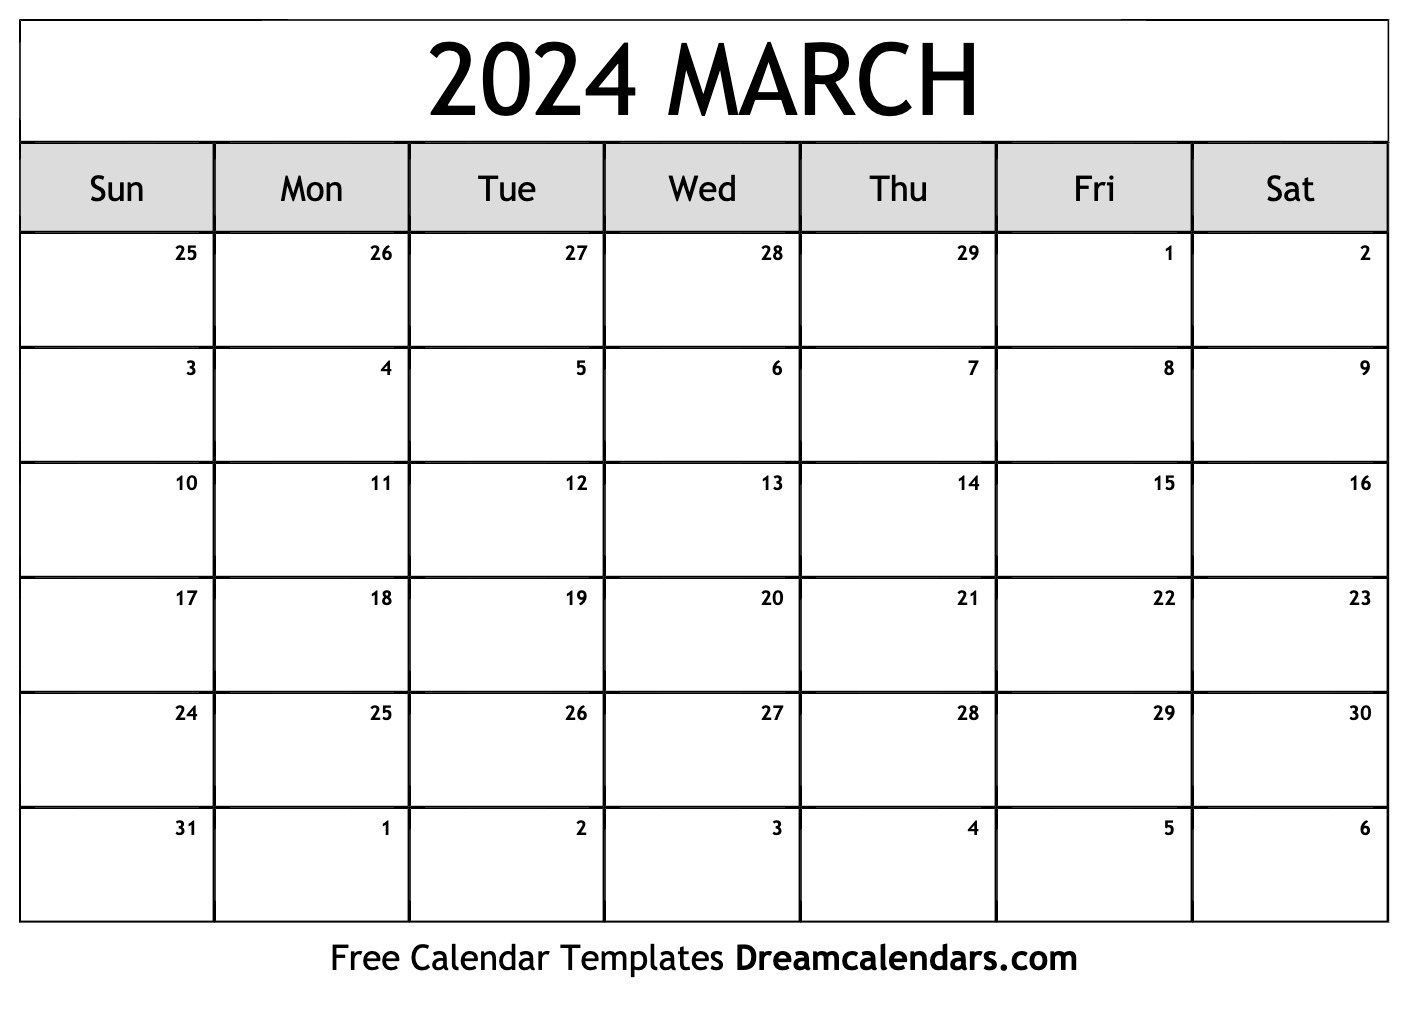 March 2024 Calendar | Free Blank Printable With Holidays intended for Free Printable Calendar 2024 No Downloads March